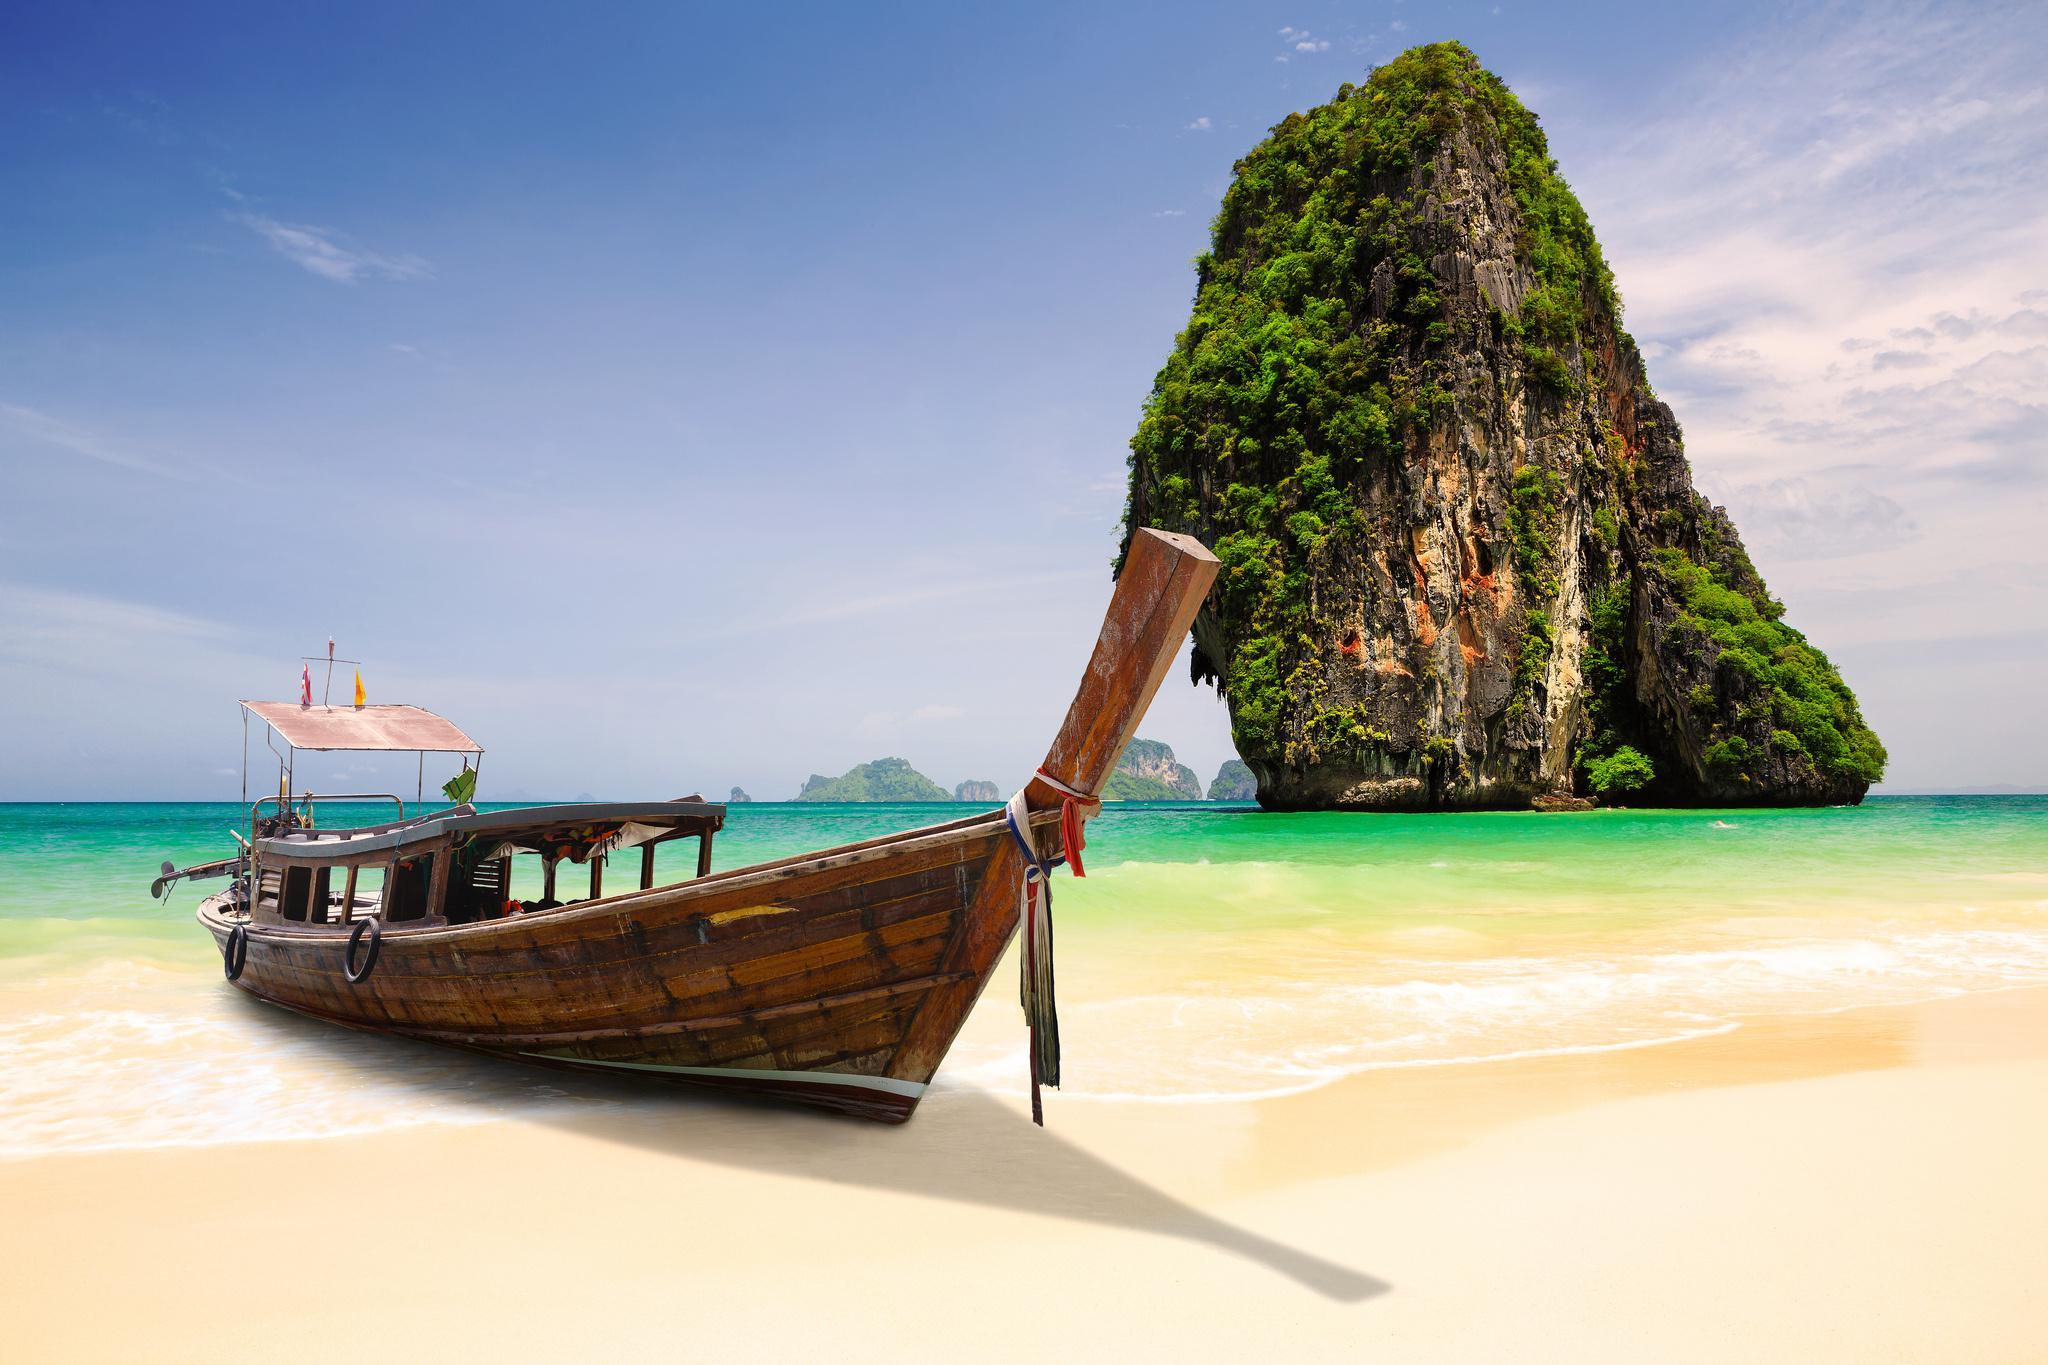 Thailand Beaches And Islands HD Wallpaper, Background Image